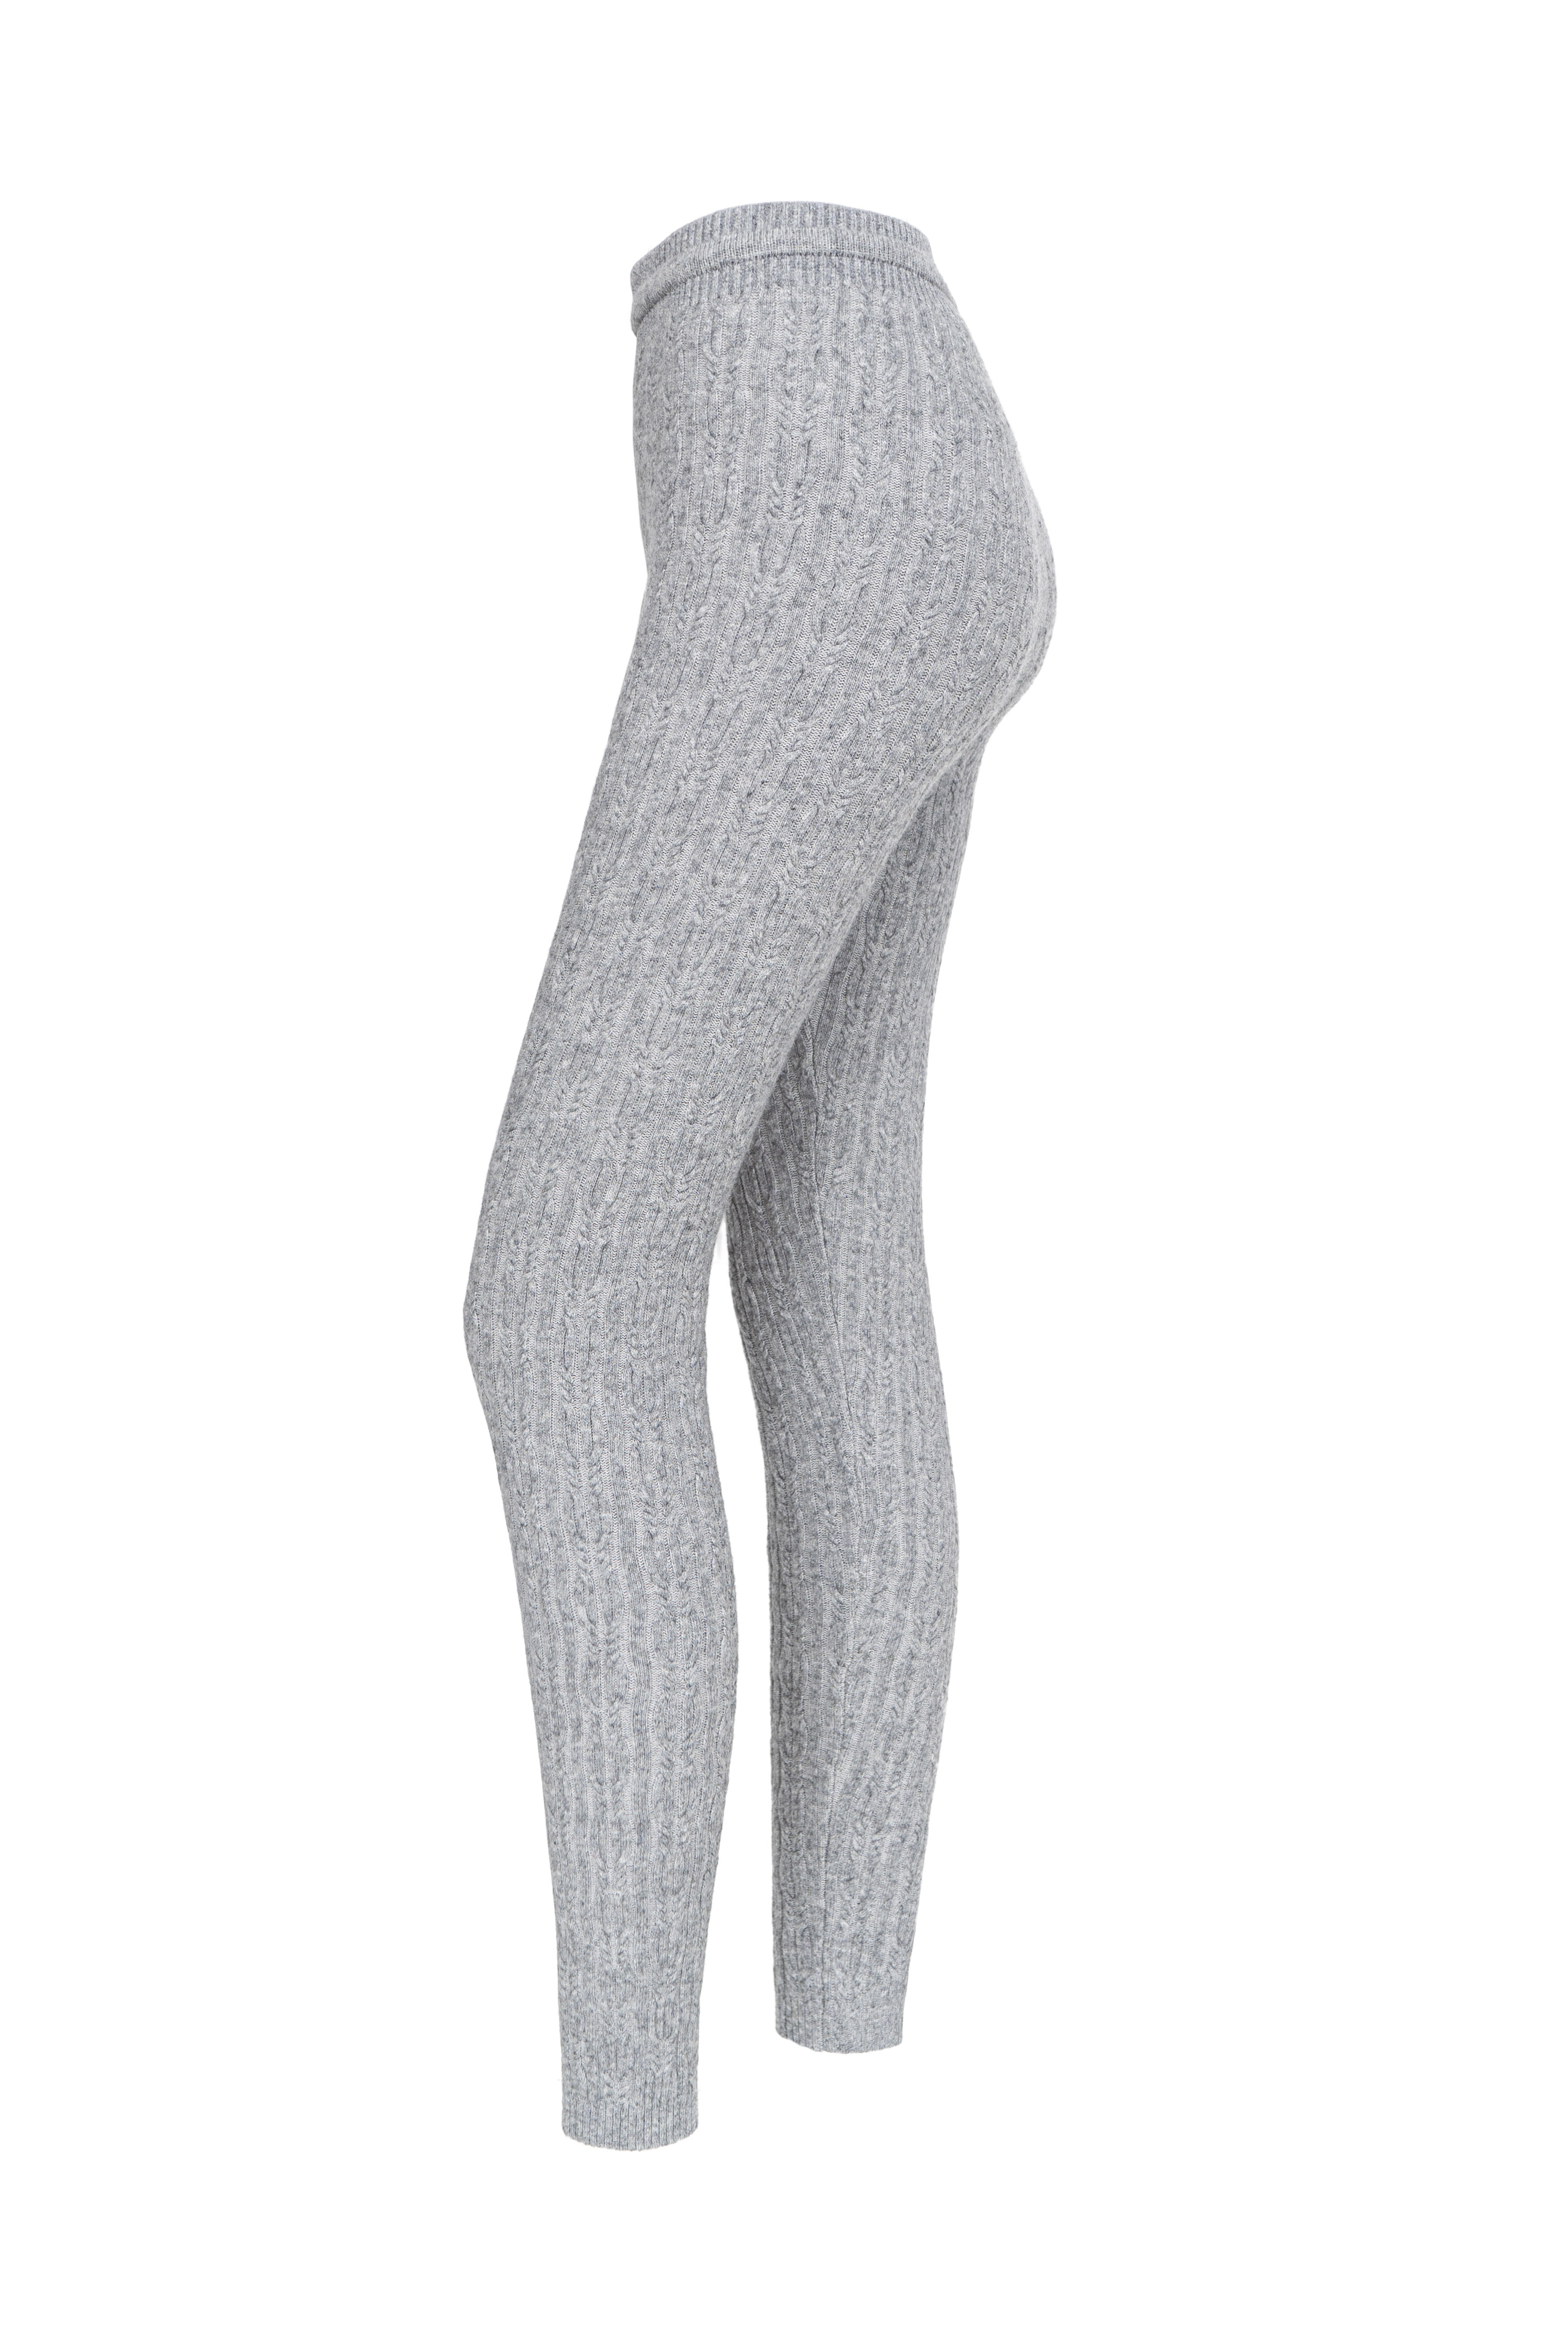 Trousers 3844-04 Grey from BRUSNiKA